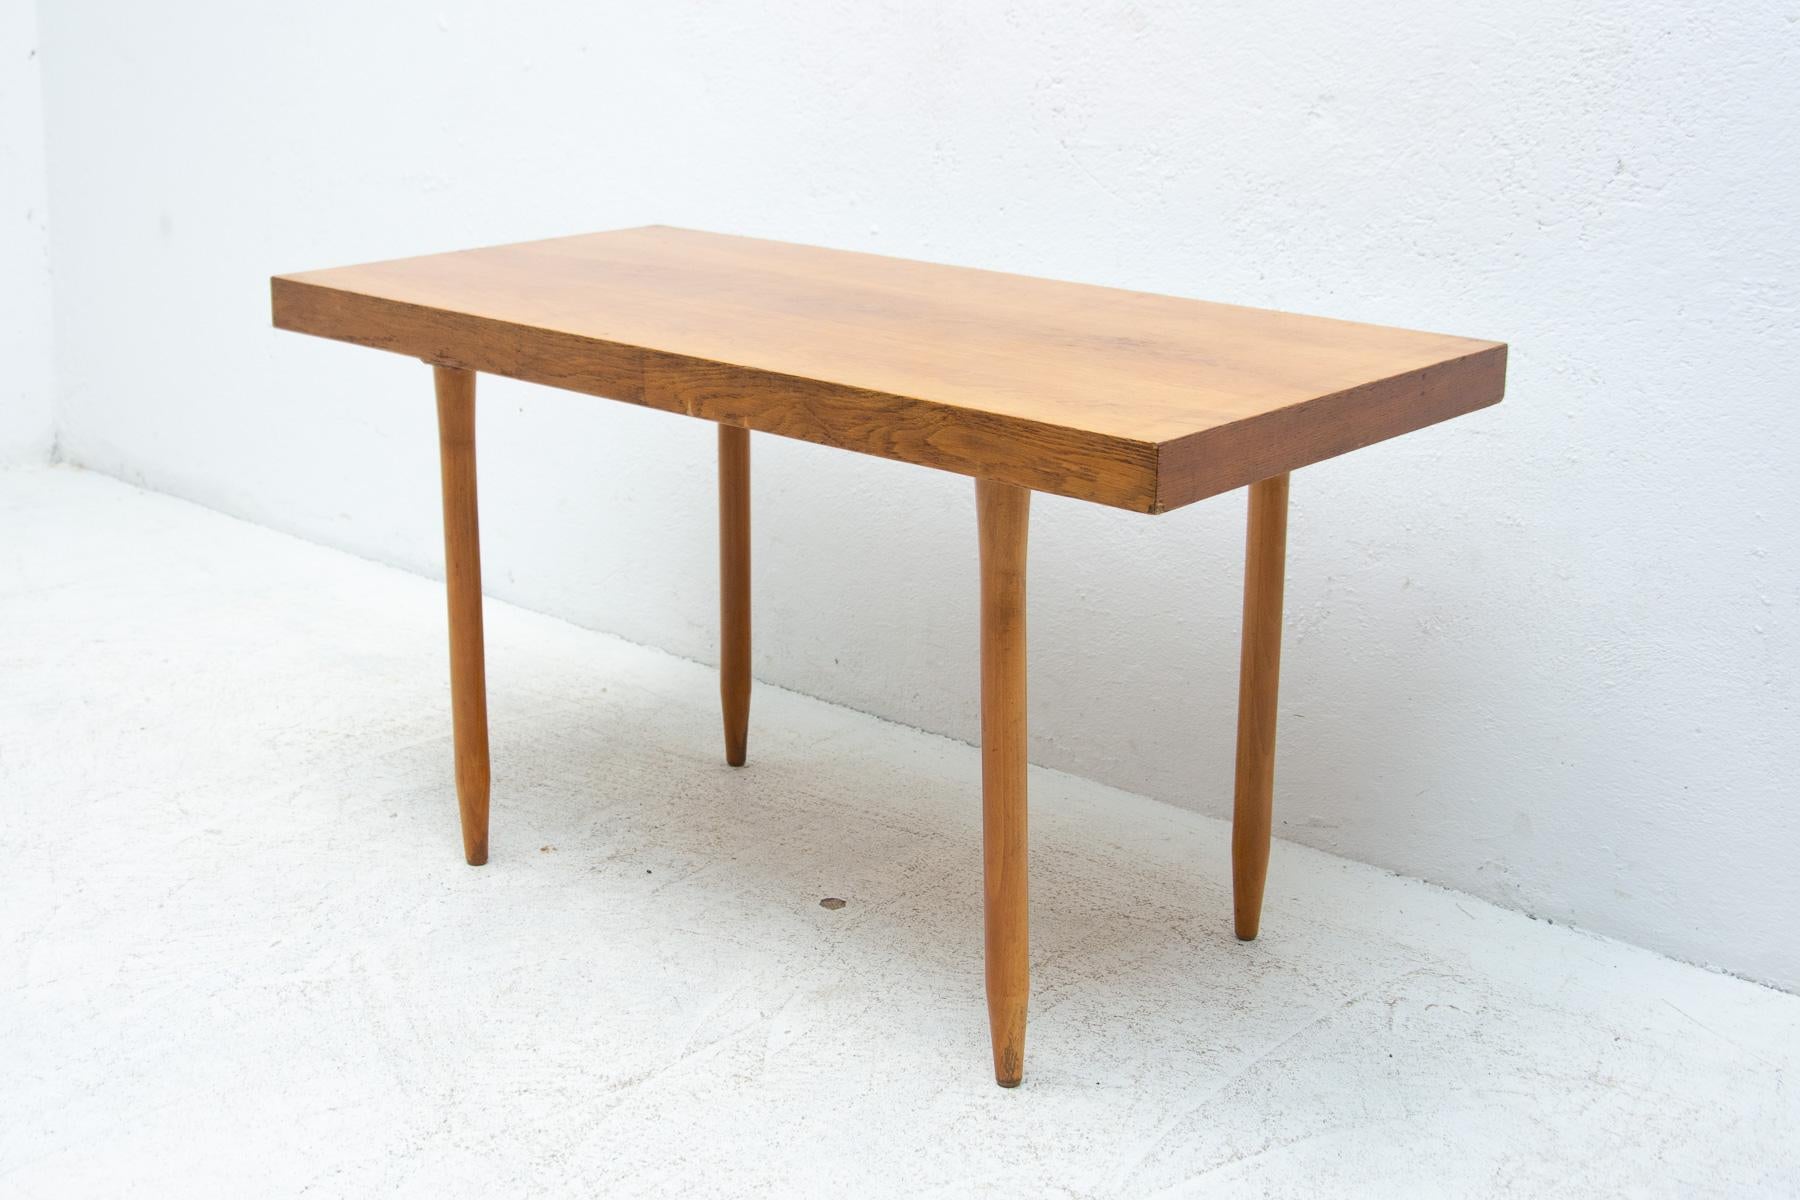 Mid century table, made in the former Czechoslovakia in the 1960´s.

It´s made of beech wood. In good Vintage condition, showing signs of age and using.

Measures: Height: 56 cm

Length: 98 cm

Width: 50 cm

Unfolded table:147 cm.